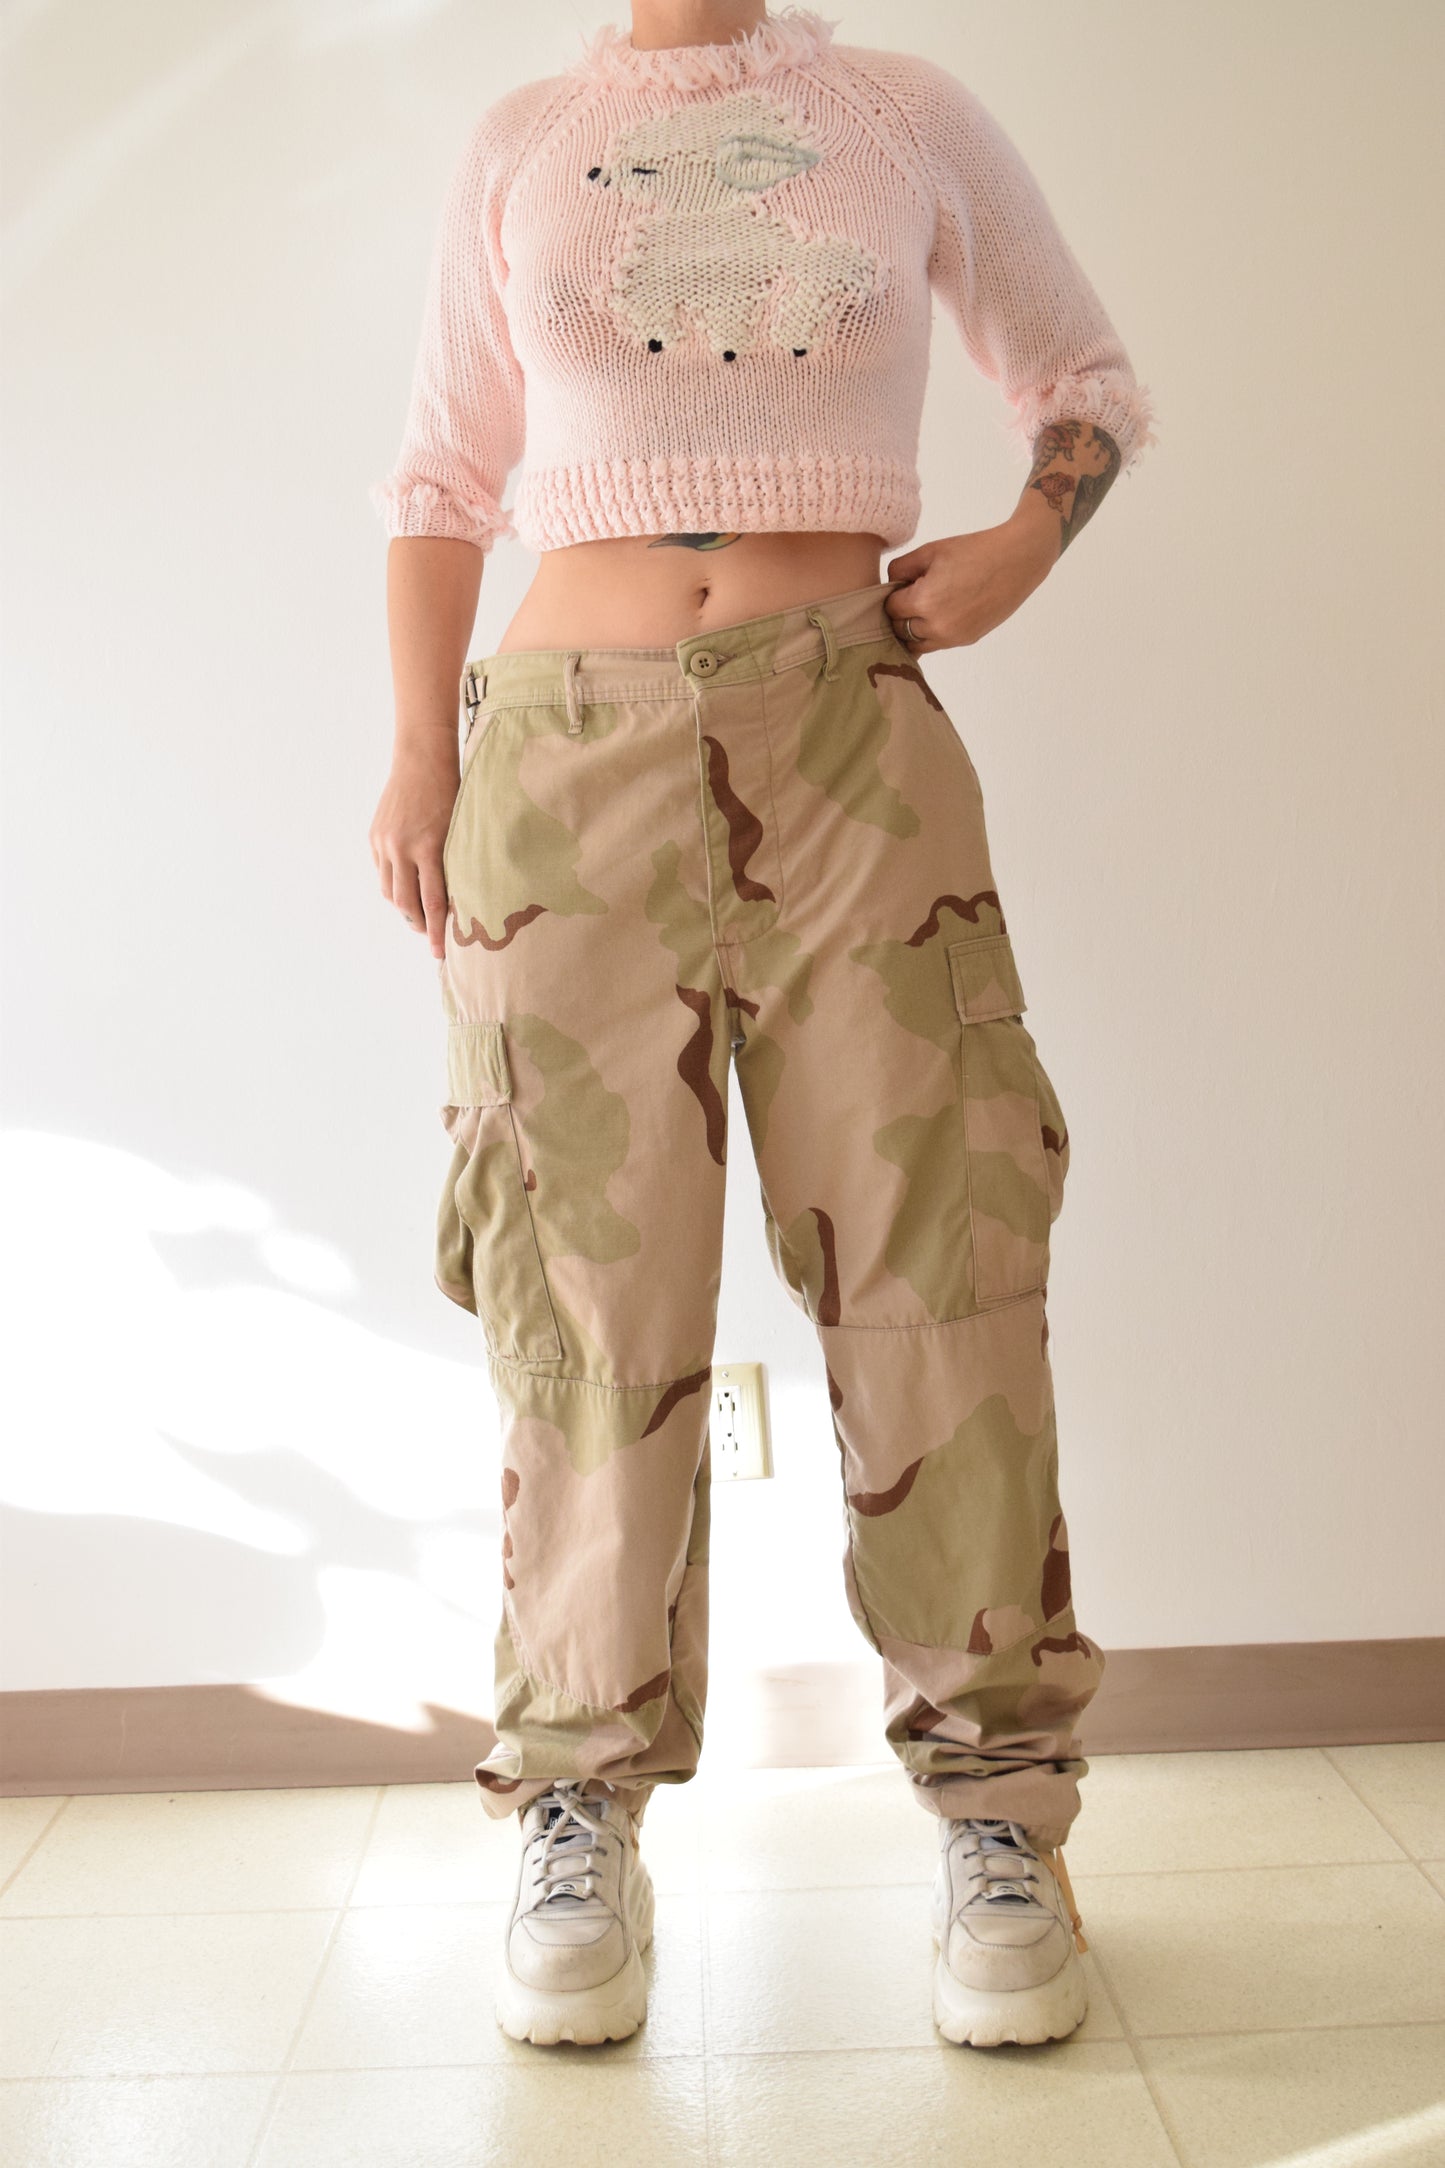 60s PALE ARMY FATIGUES - 31-35"